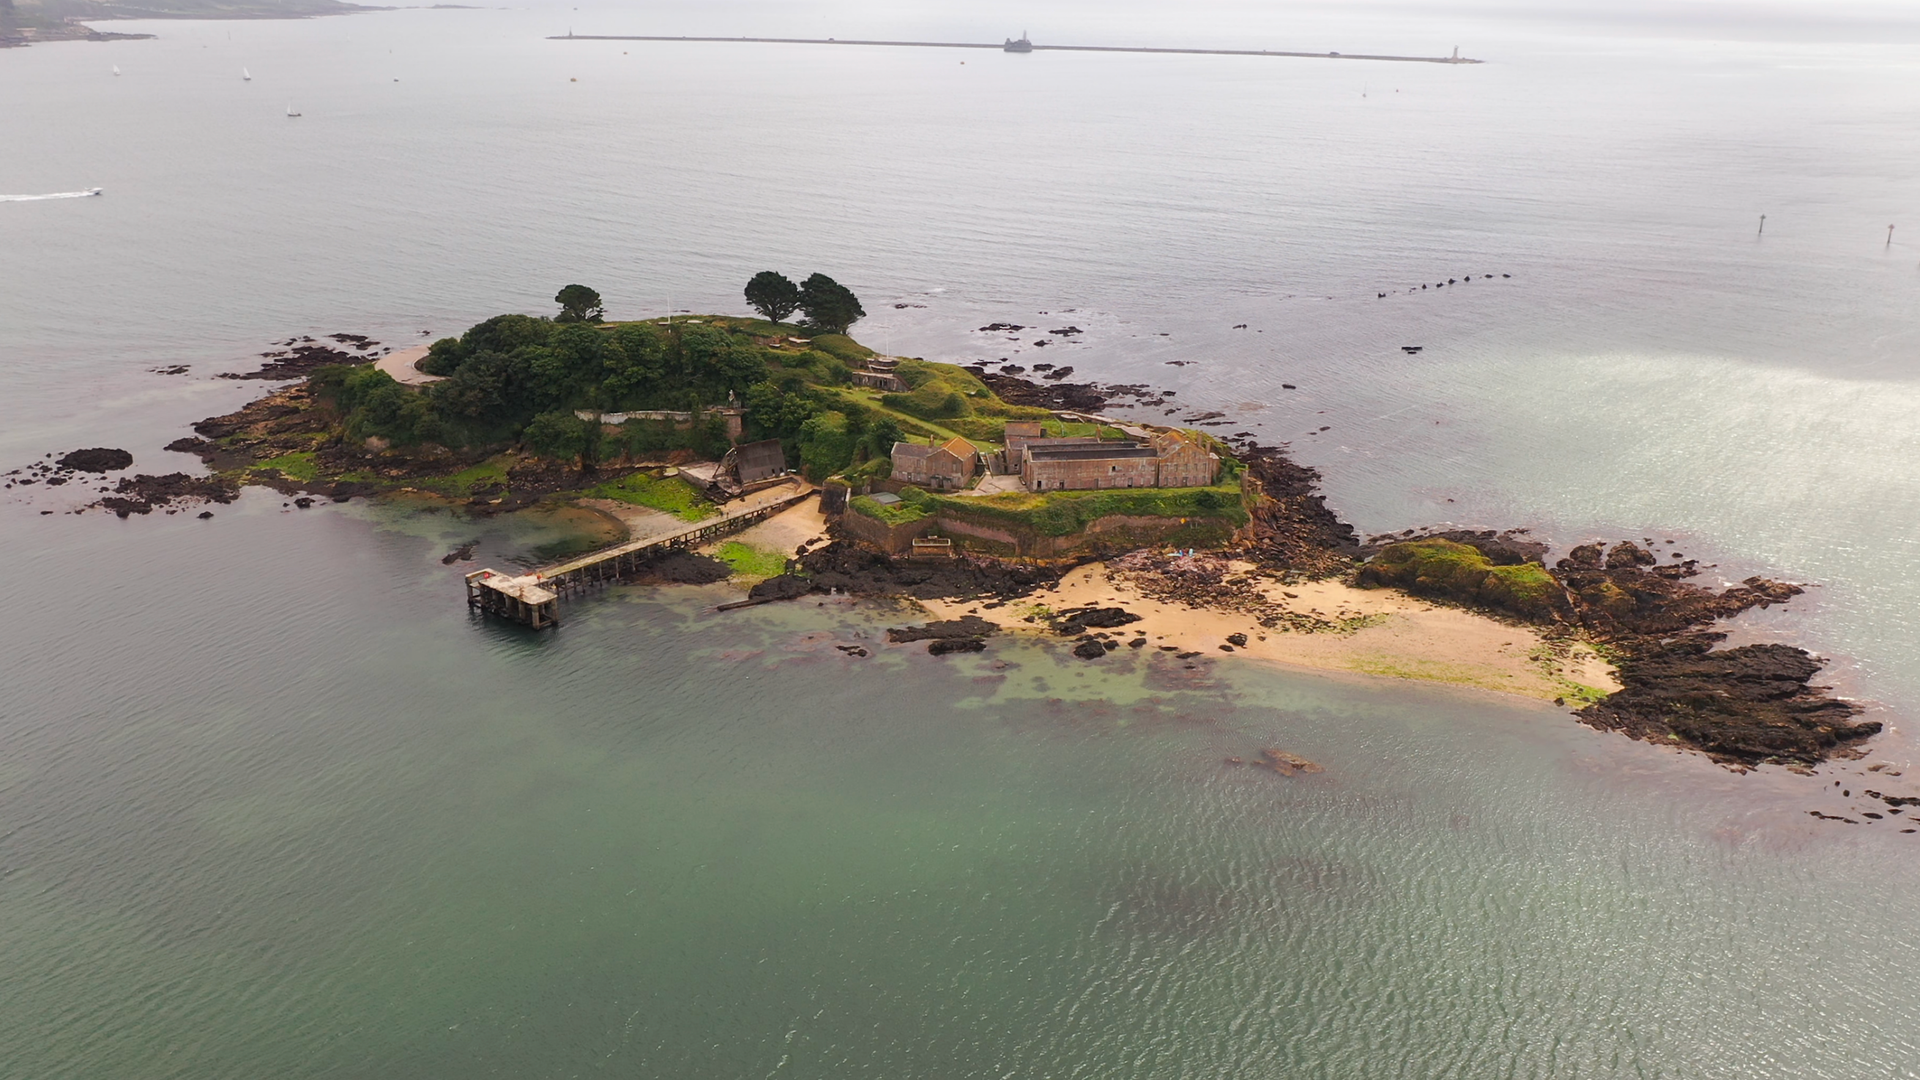 The six-acre island for sale with a private beach and 15 ghosts